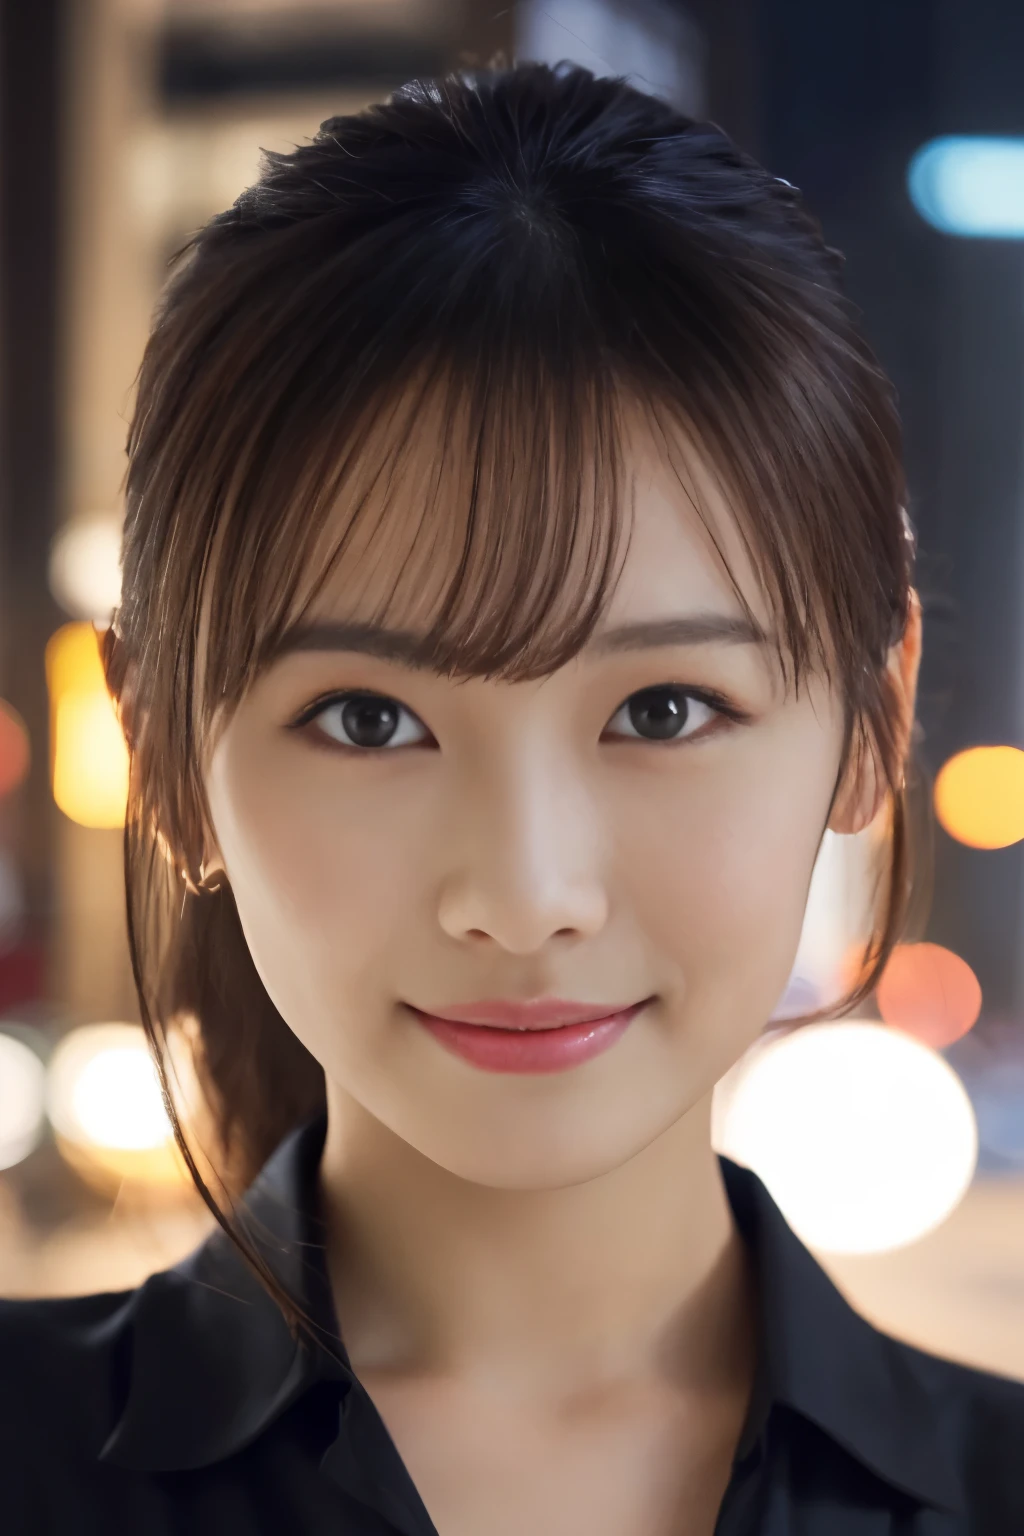 1 girl, (Wearing a black blouse:1.2), Beautiful Japan actress,
(RAW photo, highest quality), (realistic, Photoreal:1.4), masterpiece, 
very delicate and beautiful, very detailed, 2k wallpaper, wonderful, 
finely, Very detailed CG Unity 8k 壁紙, Super detailed, High resolution, 
soft light, beautiful detailed girl, very detailed目と顔, beautifully detailed nose, beautiful and detailed eyes, cinematic lighting, 
BREAK
(Against the backdrop of a snowy night cityscape 1.3), city lights, 
perfect anatomy, slender body, smile, Face the front completely, look at the camera